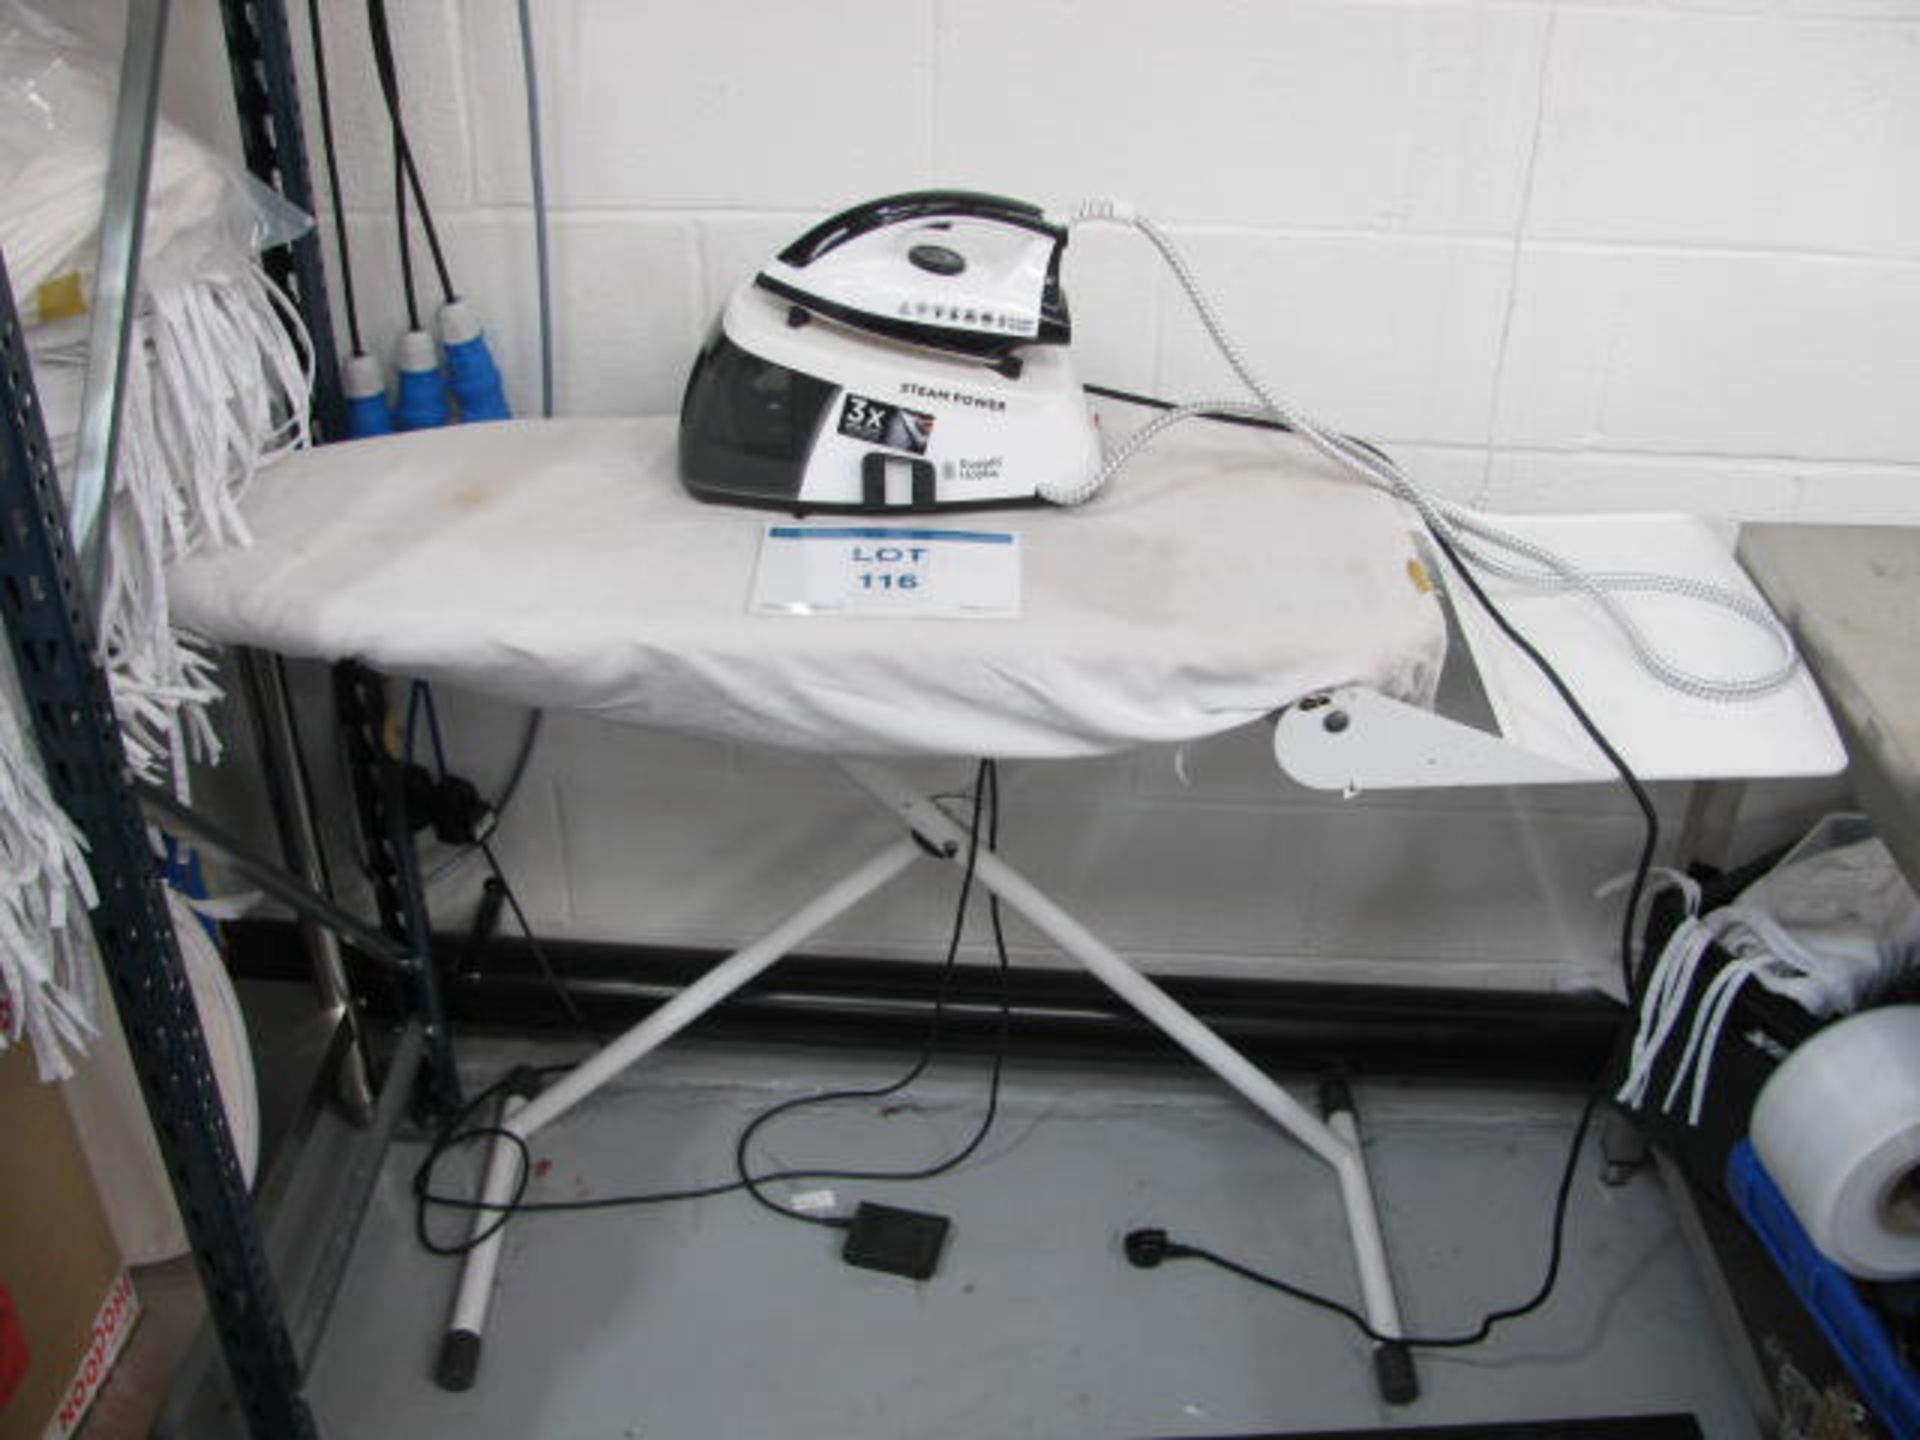 Russell Hobbs steam power iron and steel folding ironing board - Image 2 of 2